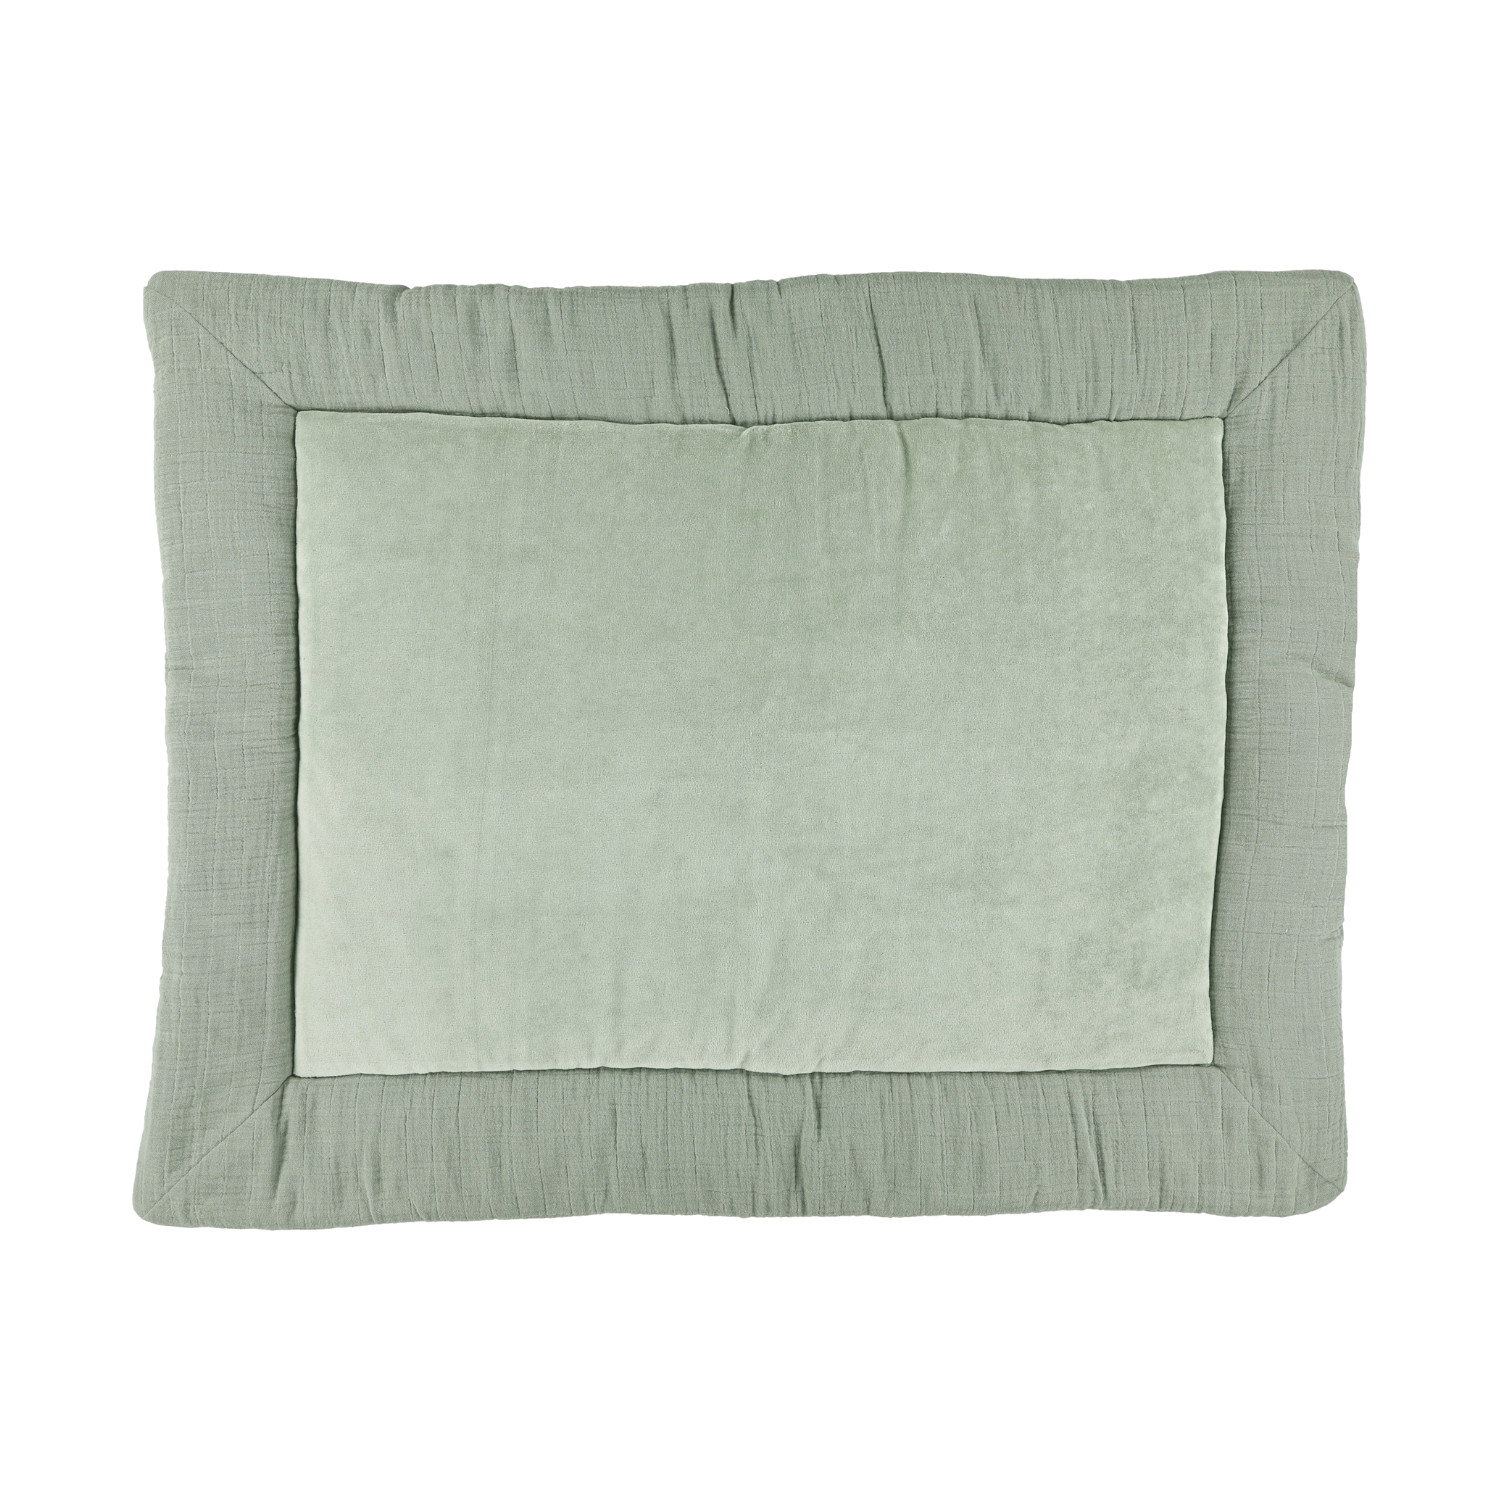 TRIXIE Bliss Boxkleed Olive 75 x 95 cm groen